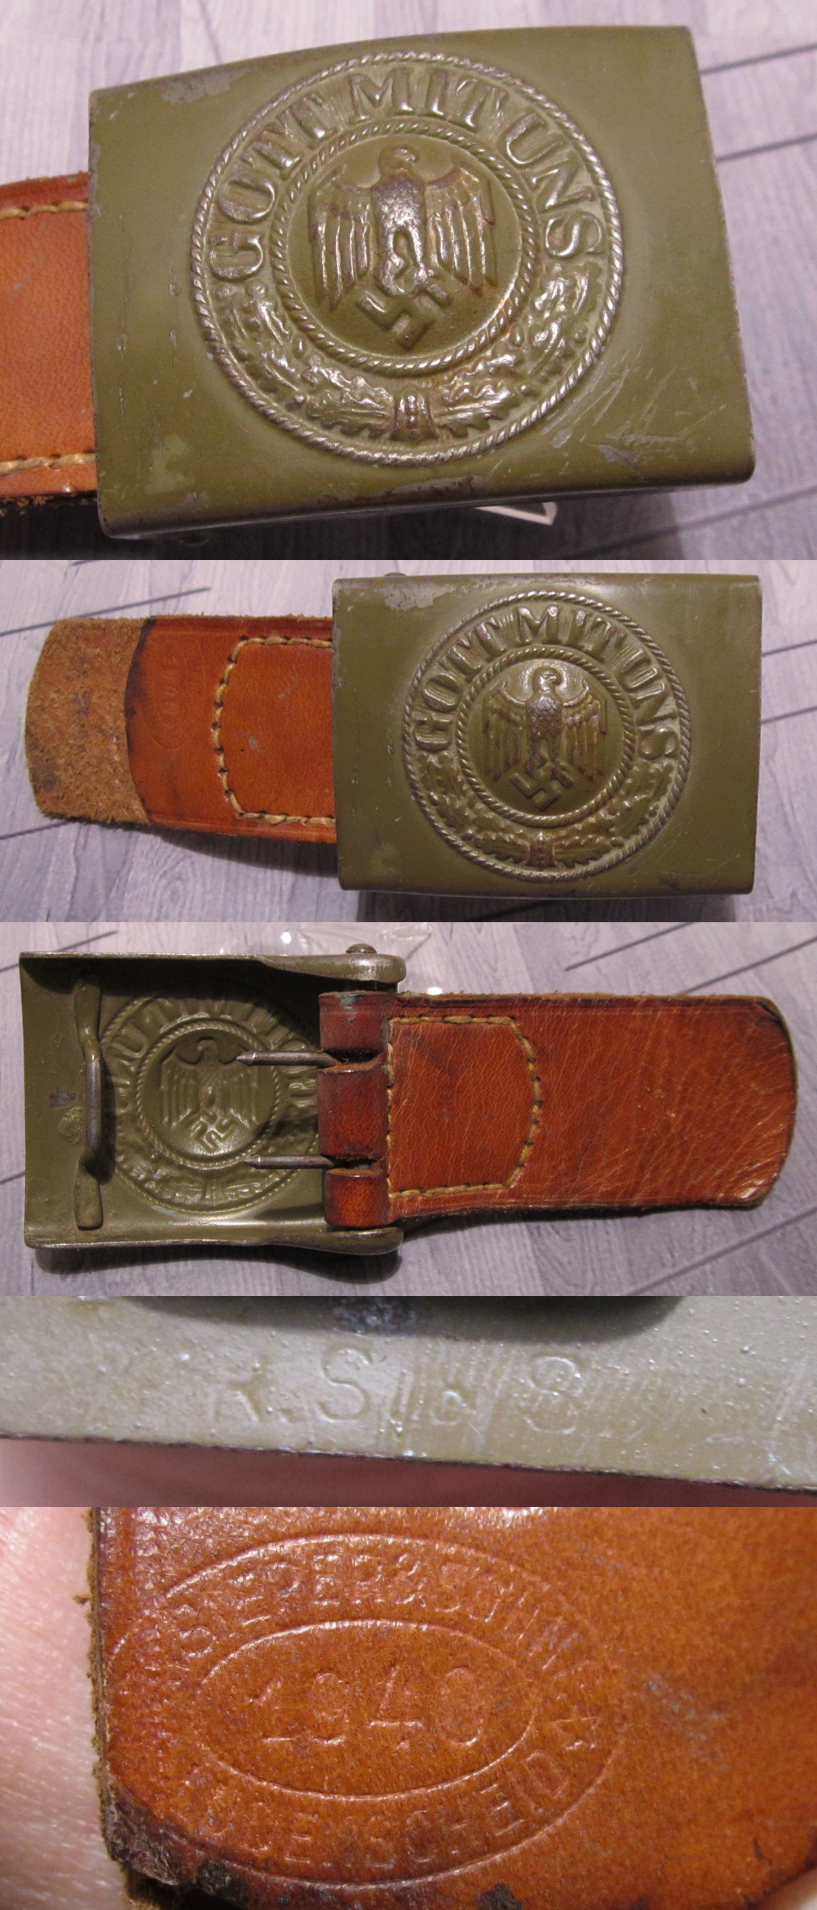 Tabbed Tropical Army Belt Buckle by R.S.S. 1940